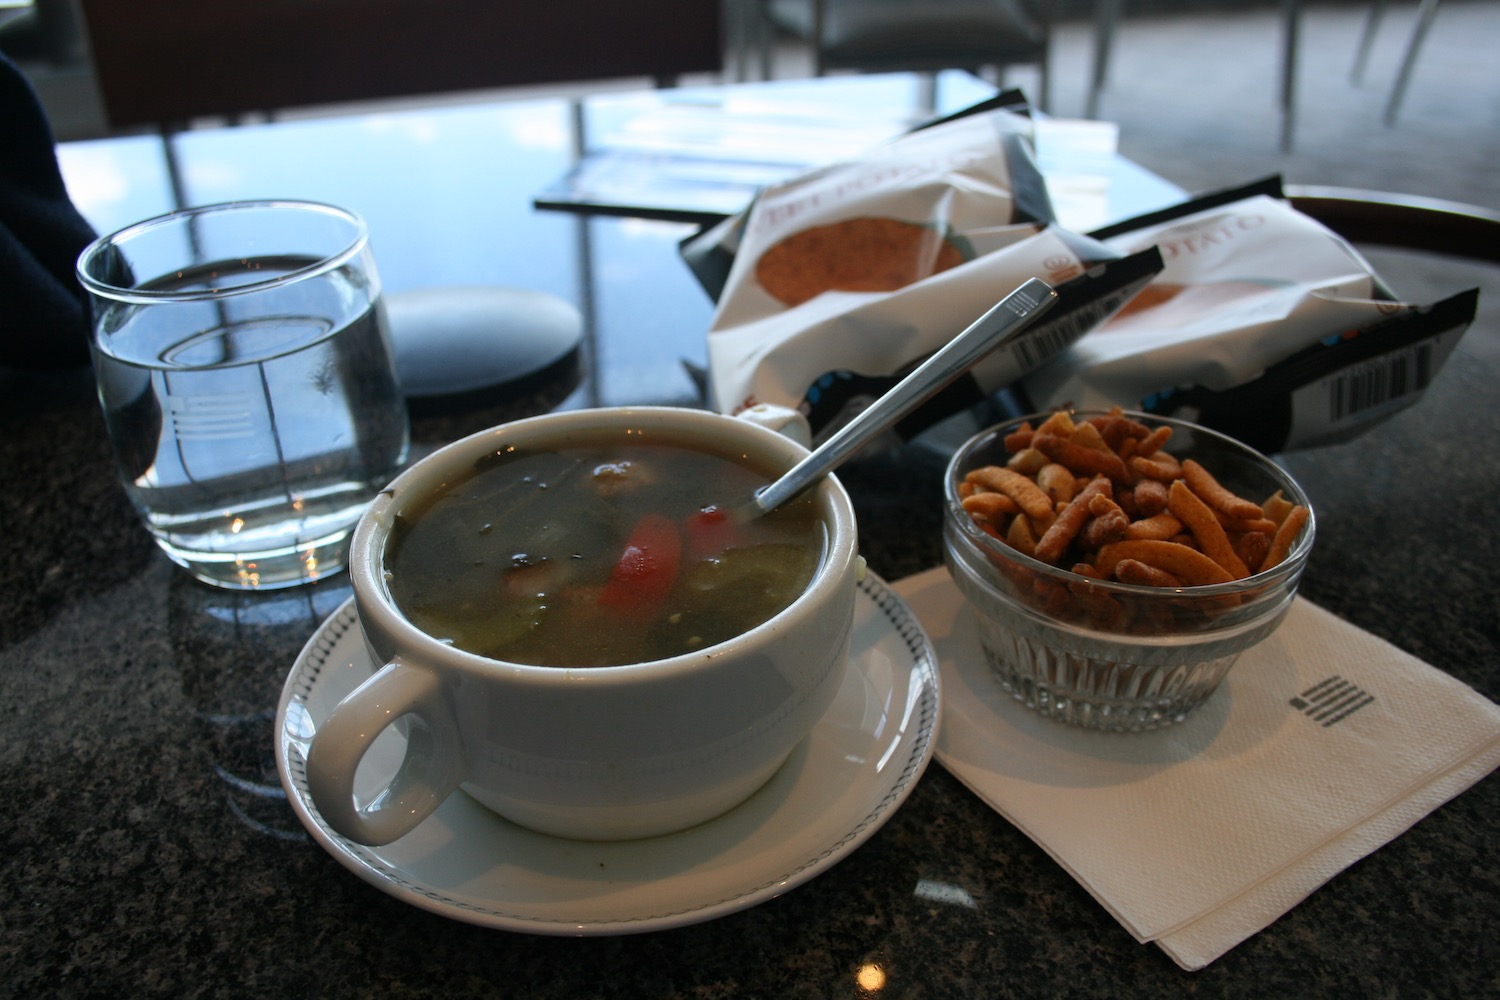 a bowl of soup and a bowl of pretzels on a table